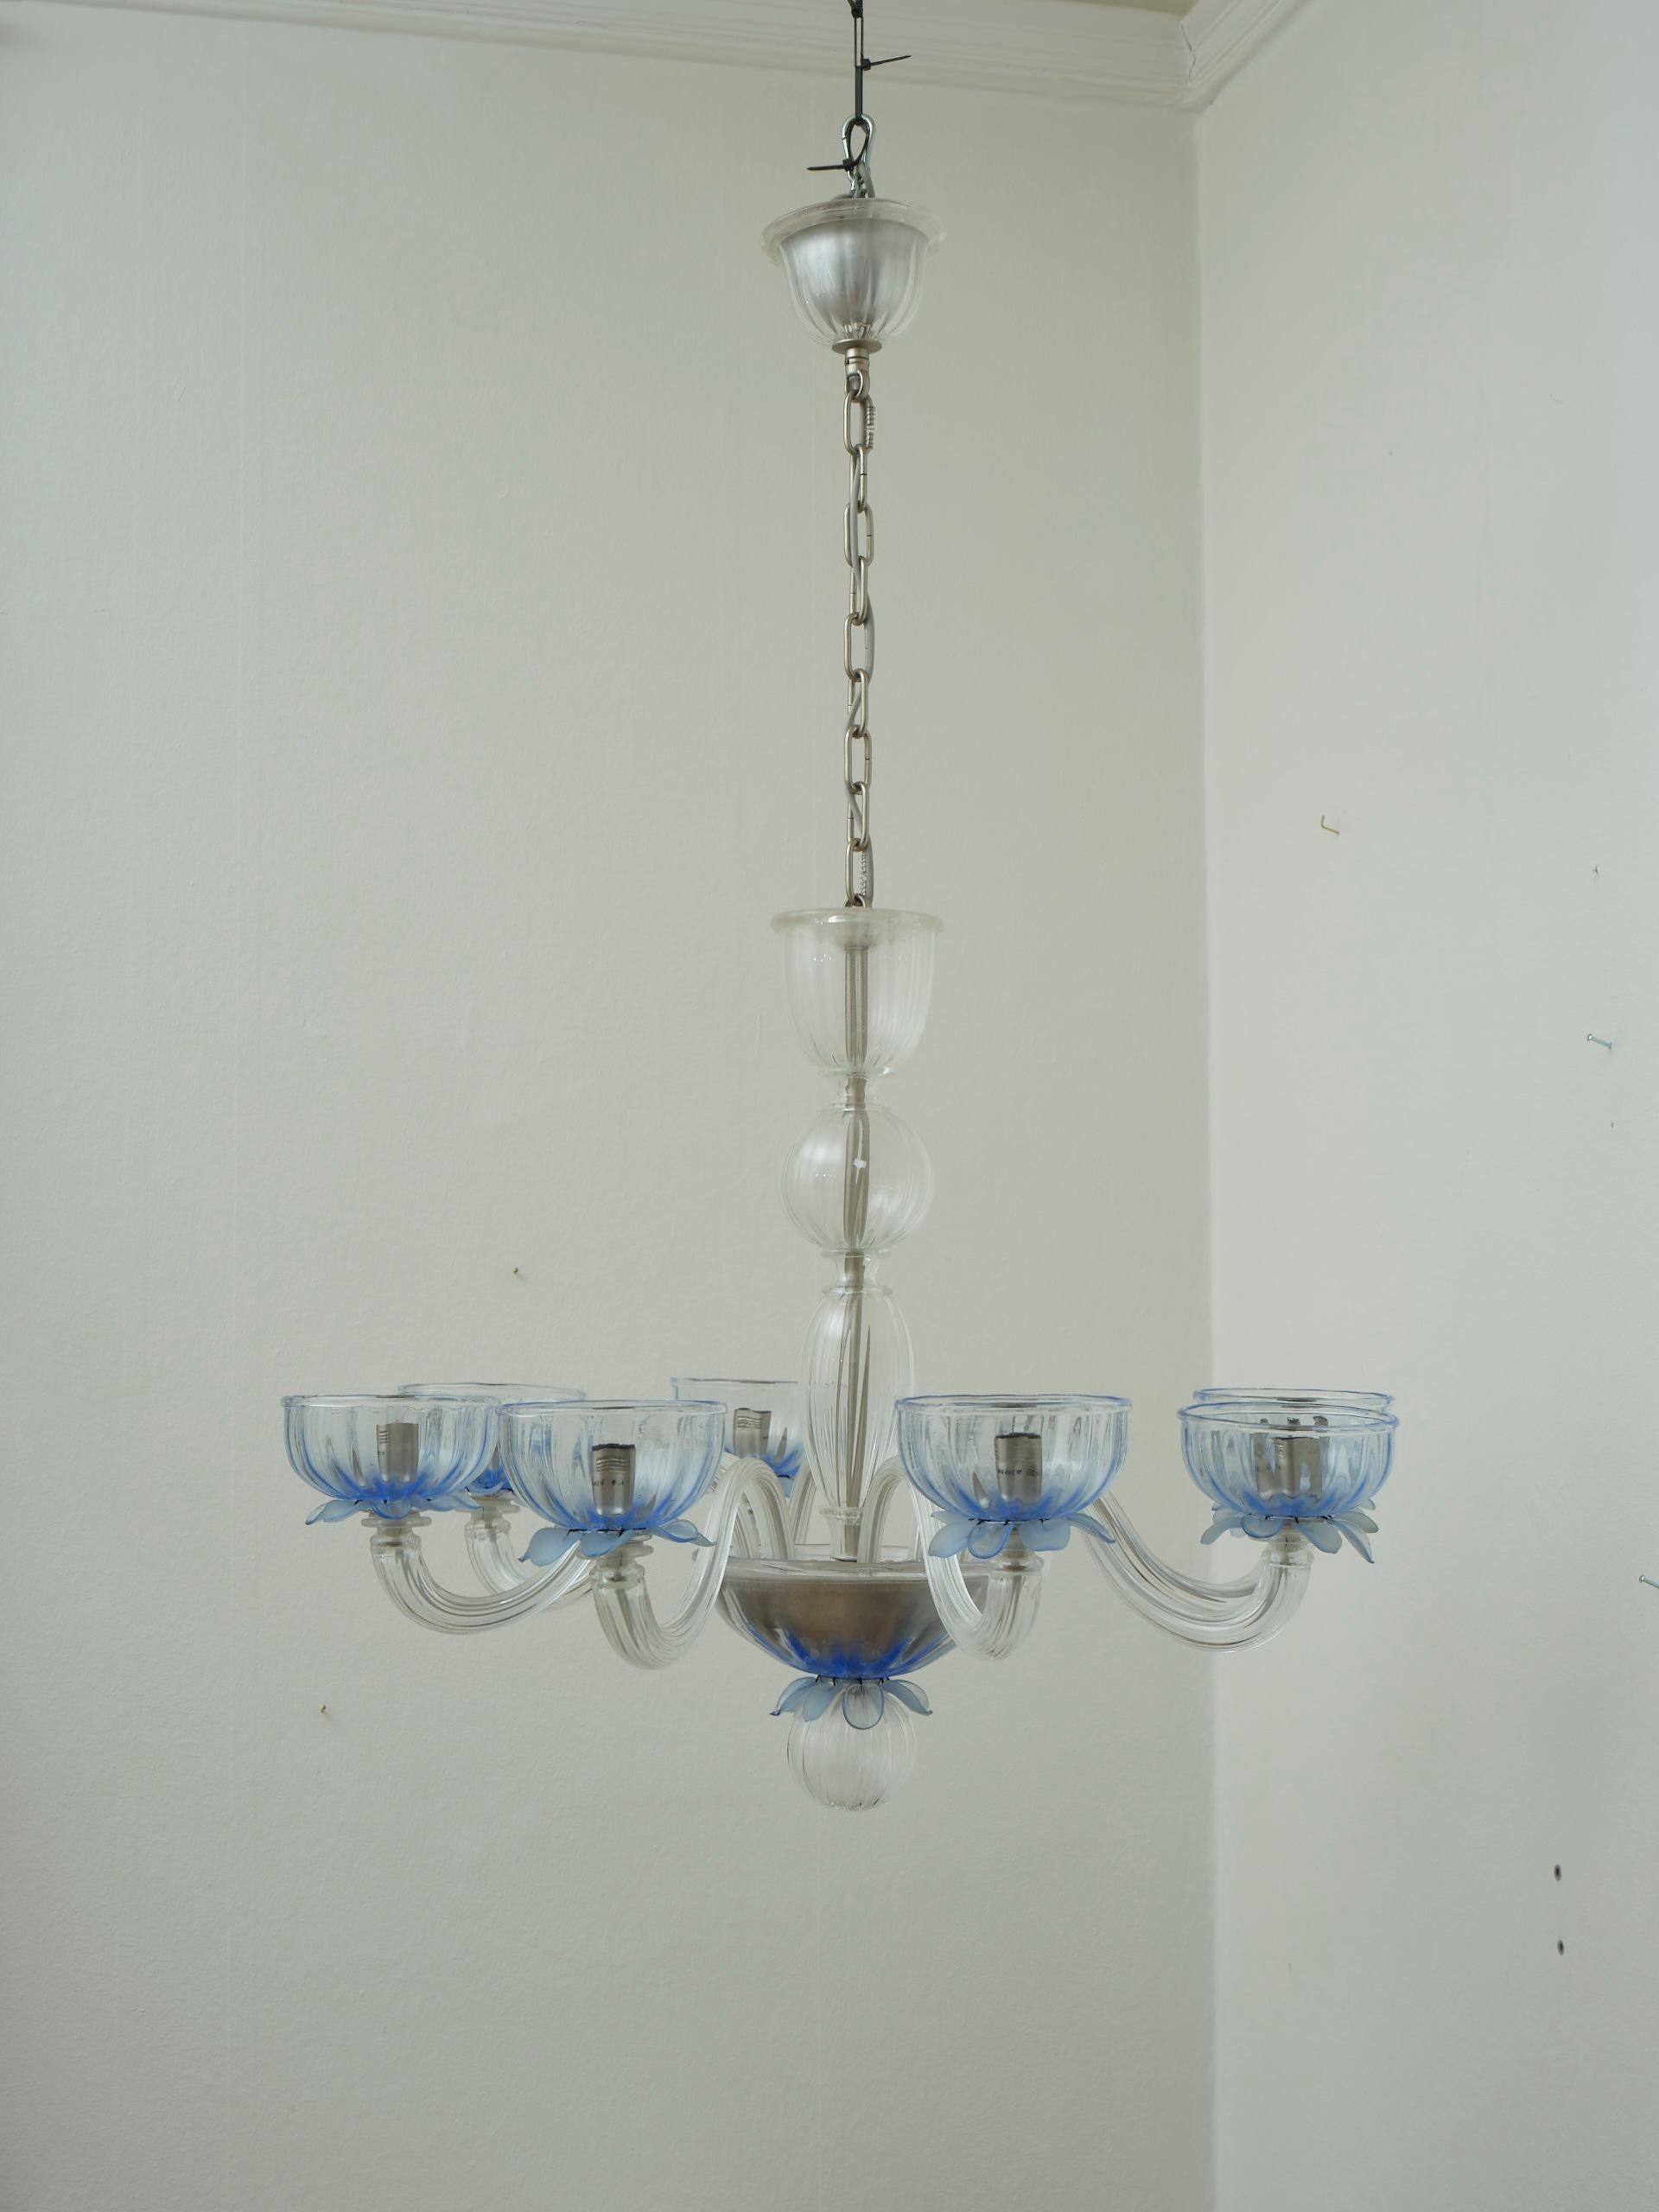 Organic Modern Giant European glass chandelier 8 arms blue details in the style of Murano For Sale